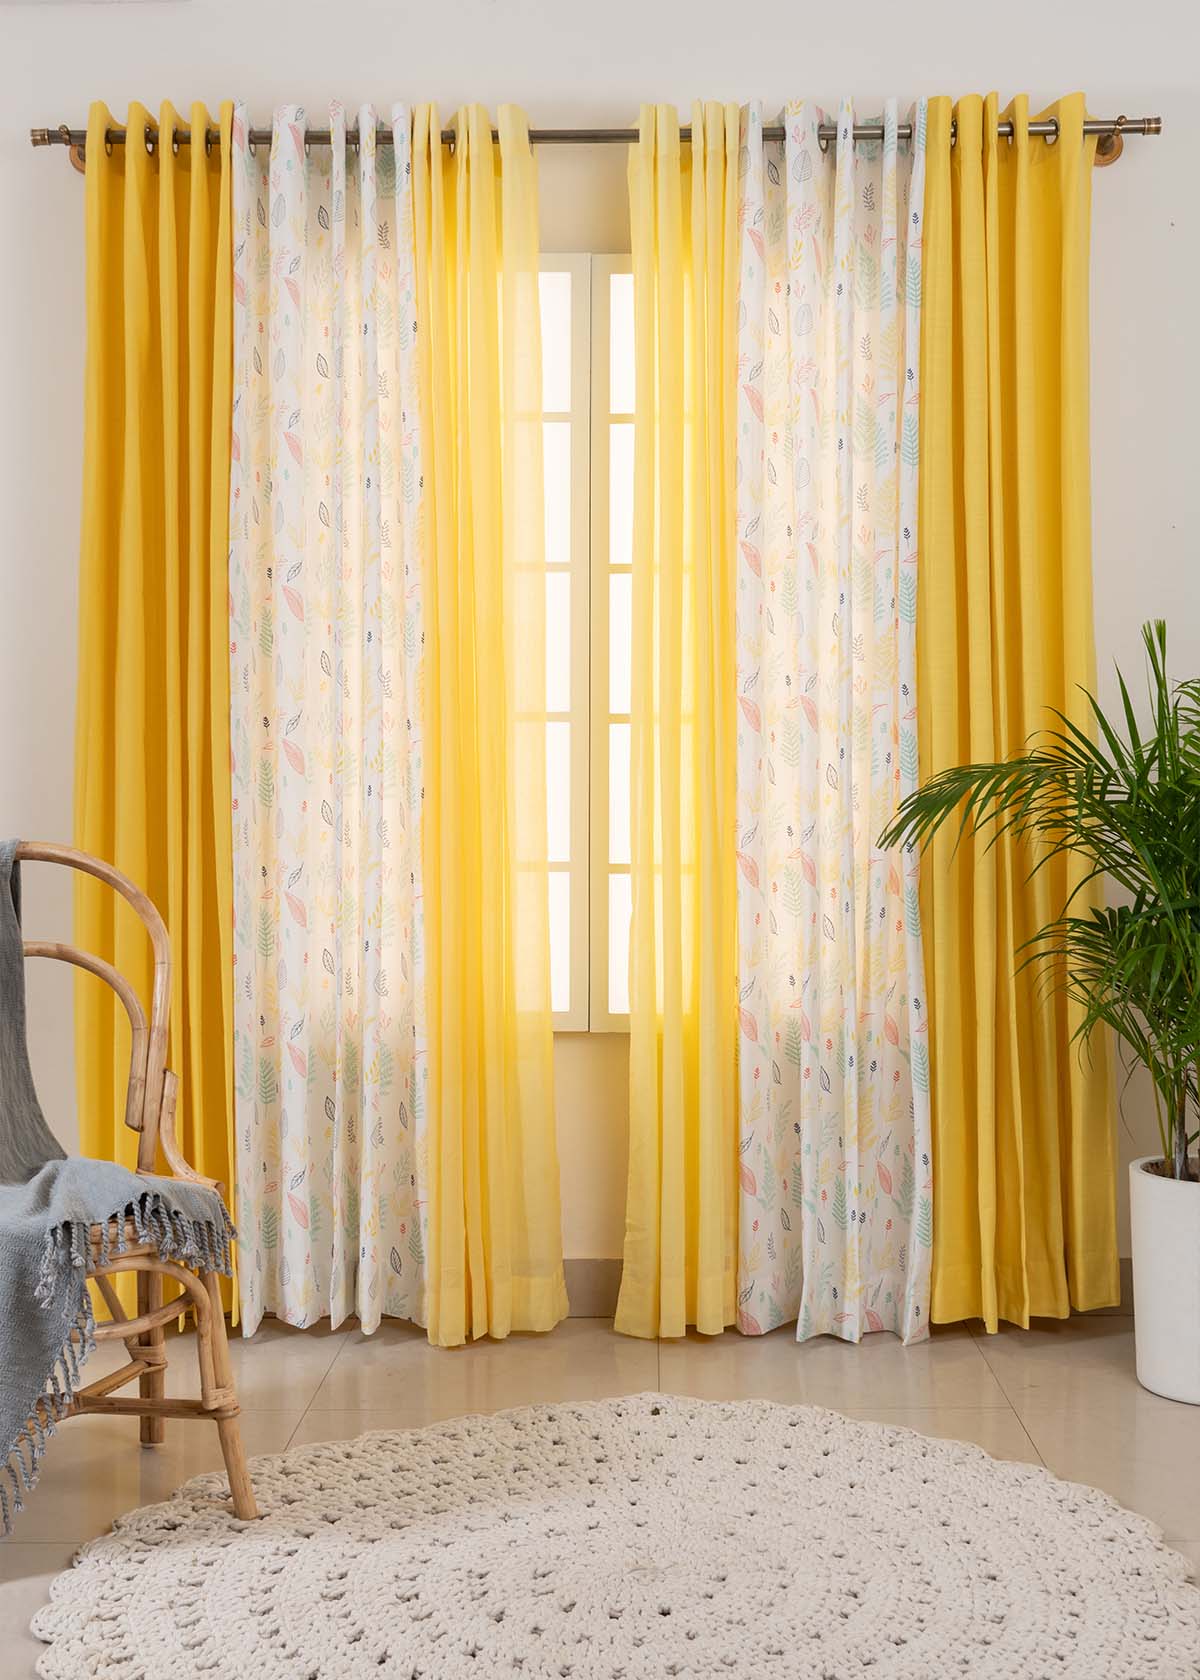 Primrose Yellow Solid, Rustling Leaves In Many Hues, Pale Banana Sheer Set Of 6 Combo Cotton Curtain - Multicolor